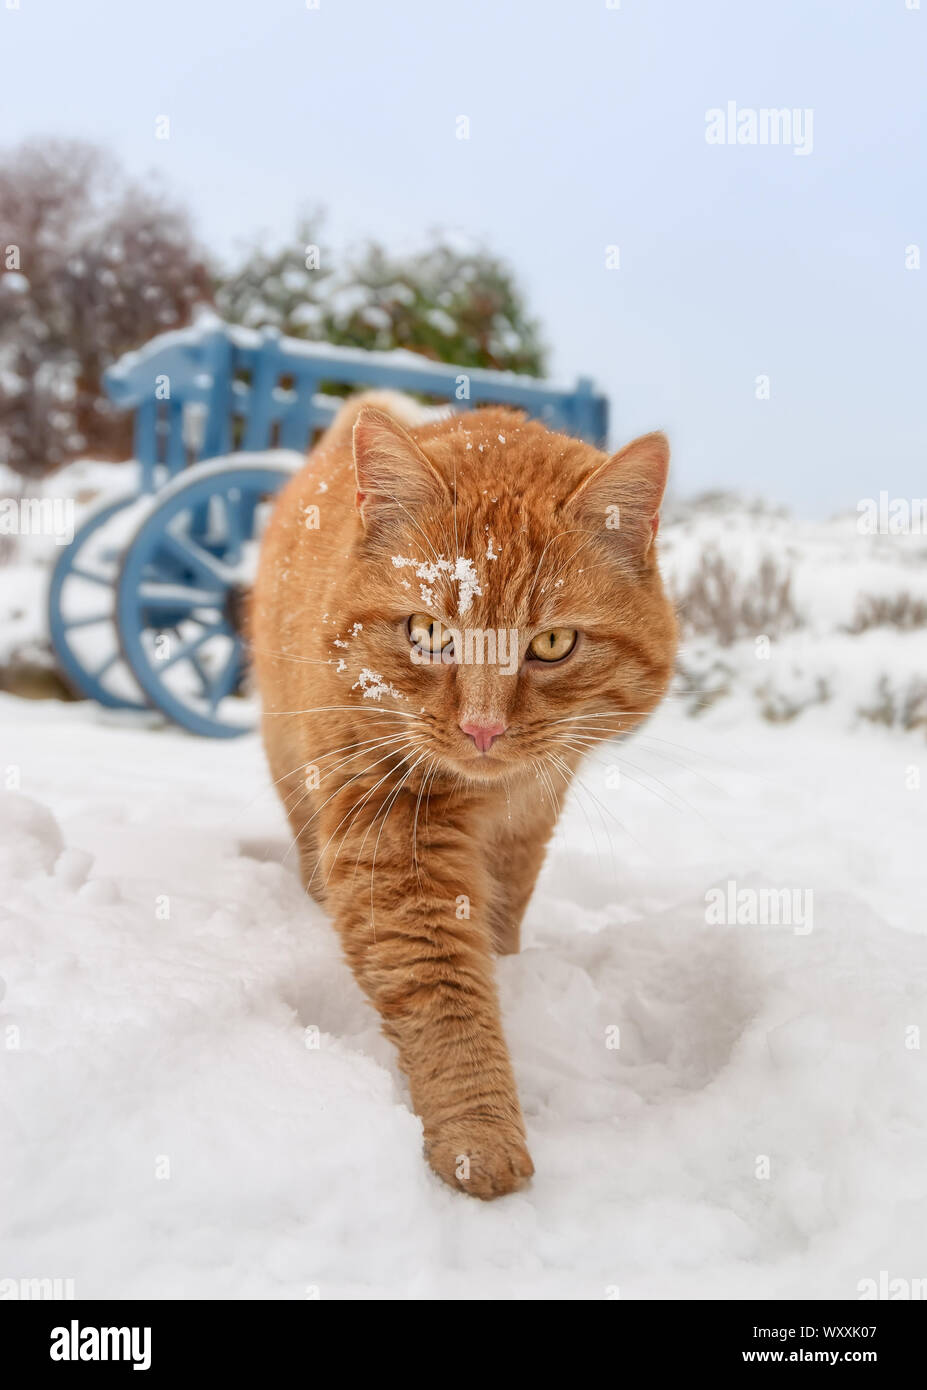 A ginger red tabby cat walking in a snow covered garden on a cold winter day and looking curious, frontal view Stock Photo